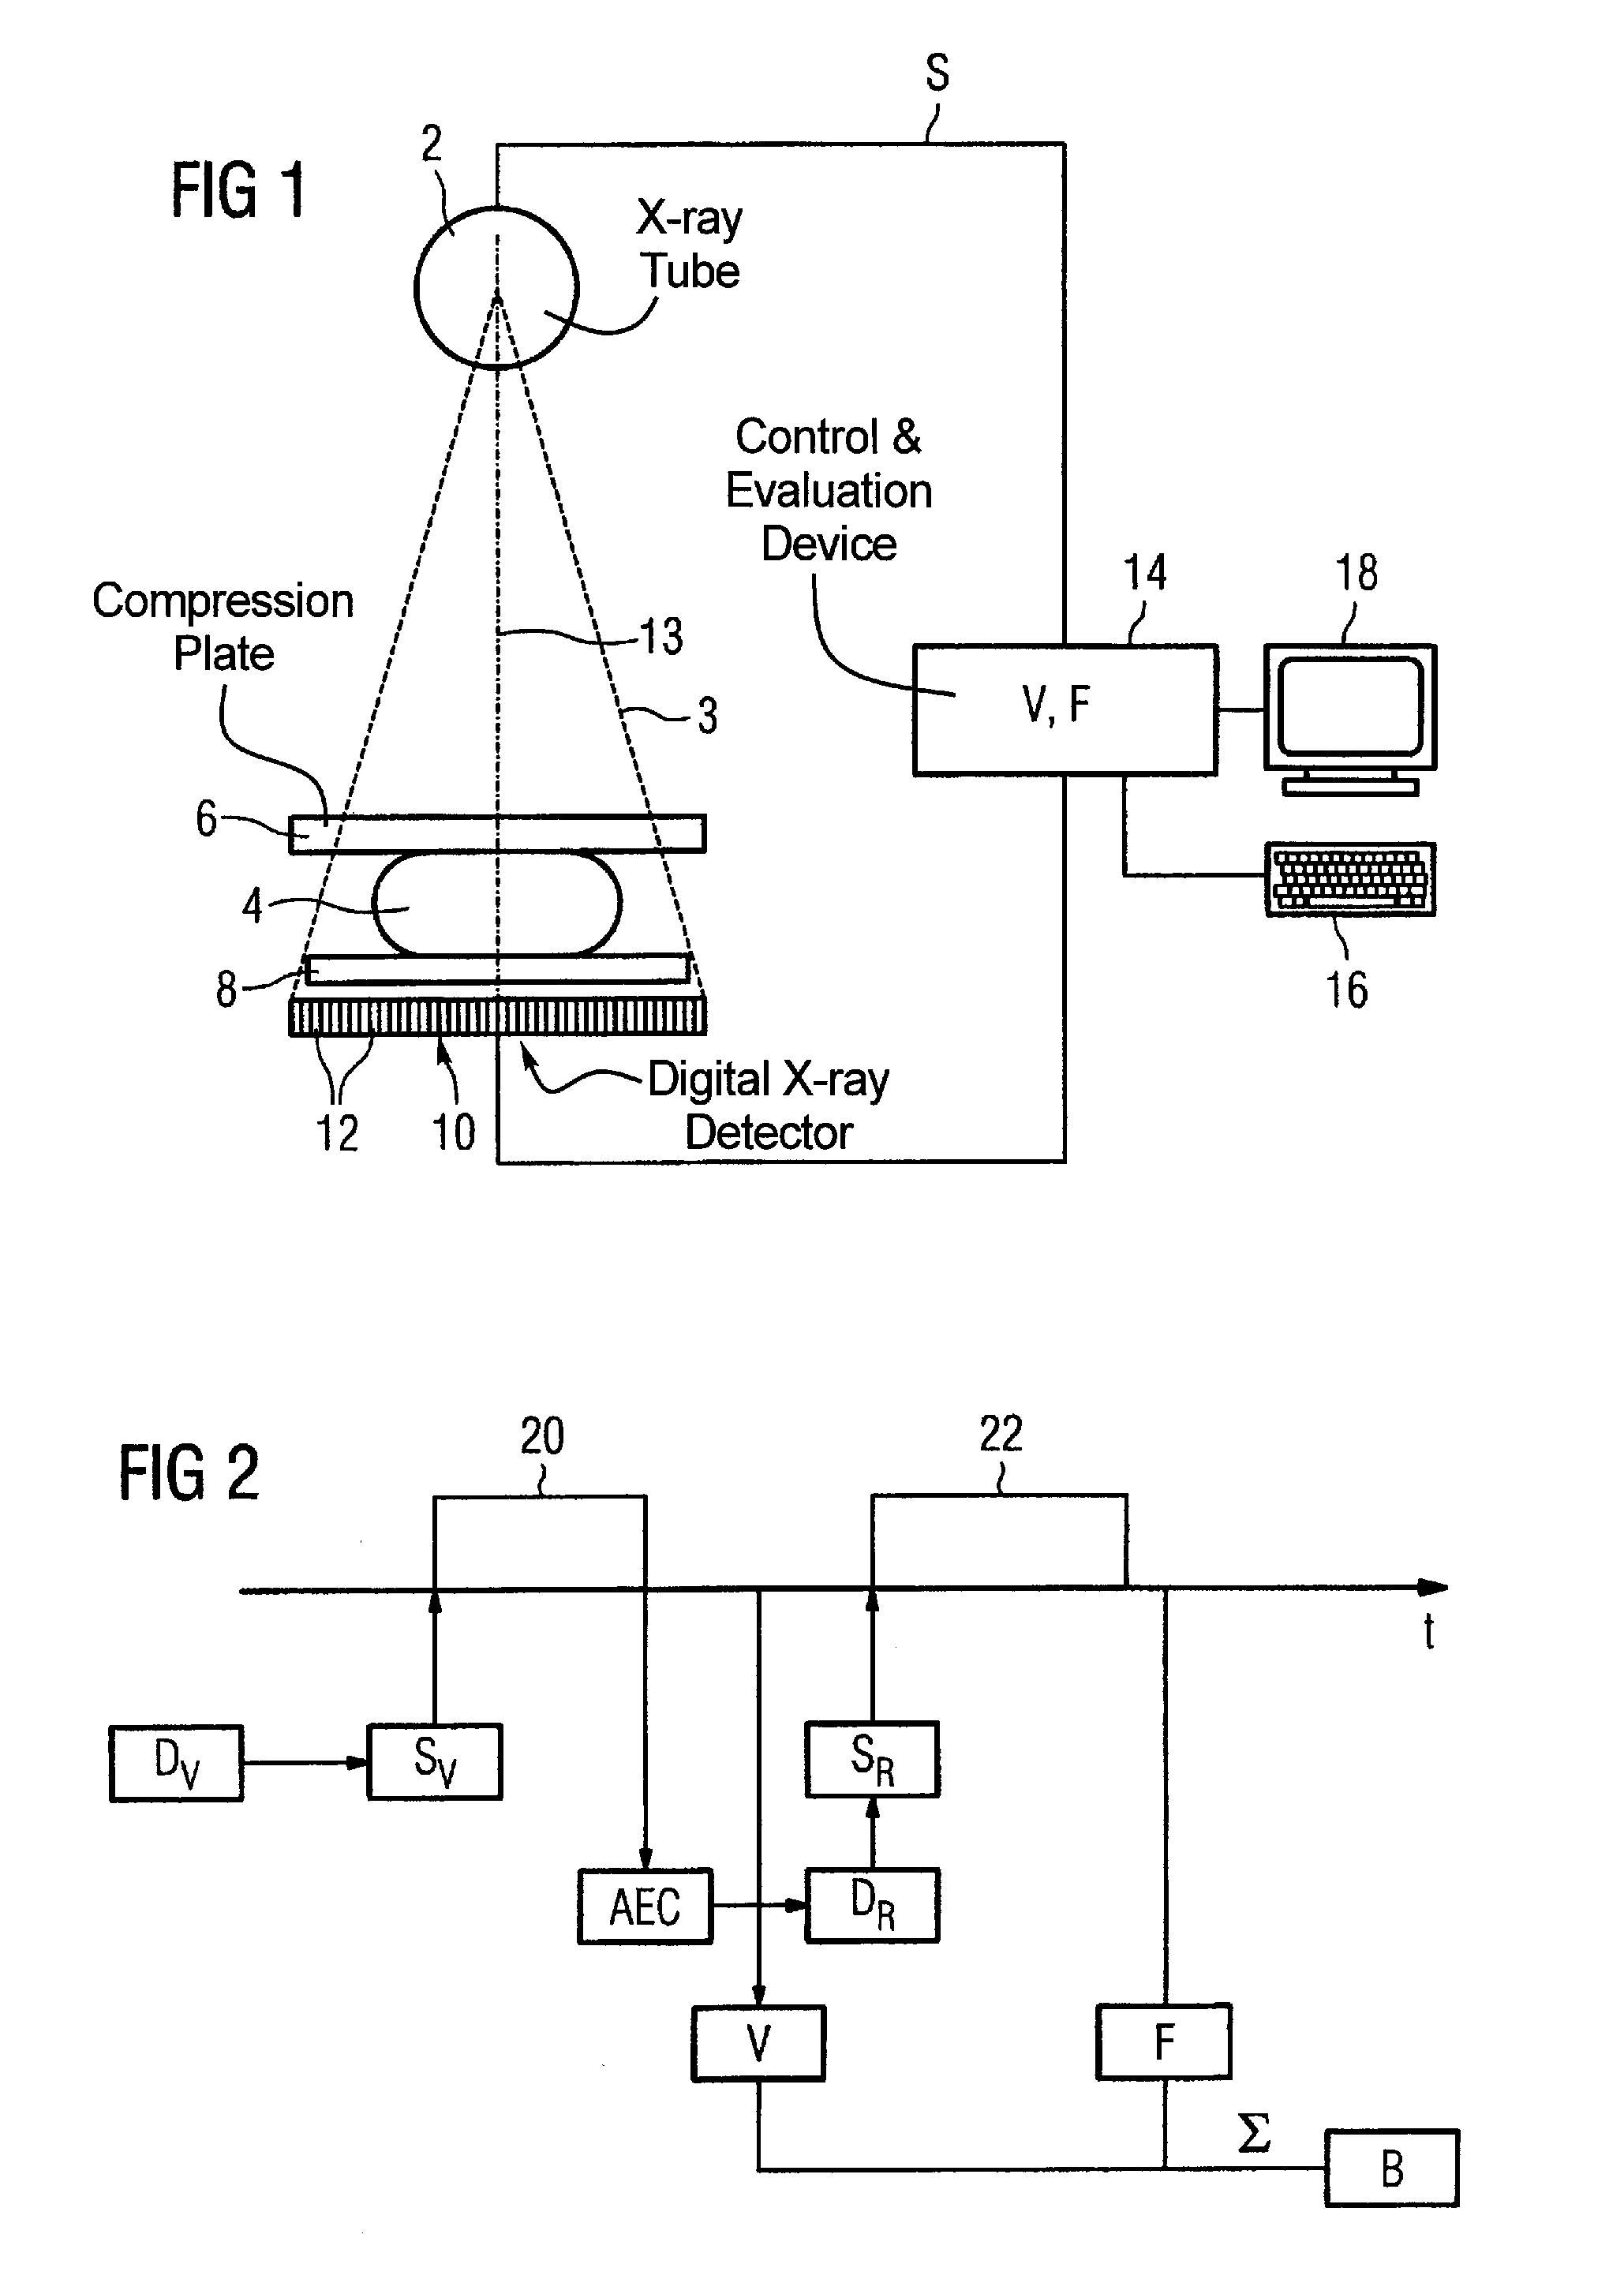 Method and apparatus for generation of a digital x-ray image of an examination subject